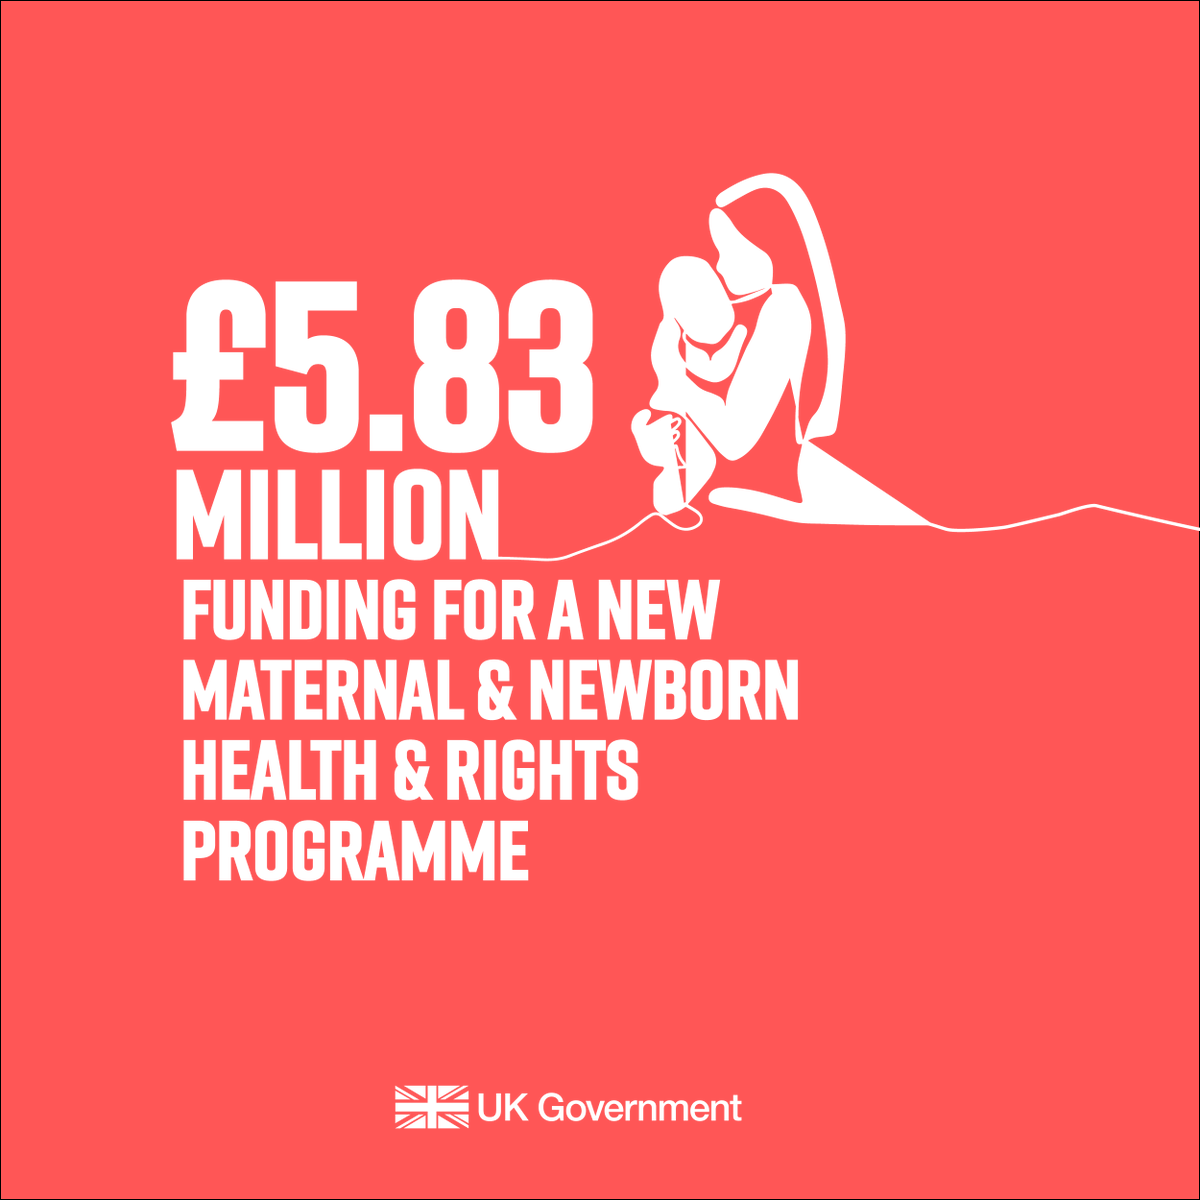 The UK is committed to improving respectful and dignified care for women and girls. Today we announced new £5.83m funding to: ✅ Strengthen grassroots organisations ✅ Focus on marginalised ✅ Increase capacity of local midwifery ✅ Create emergency transport systems for women